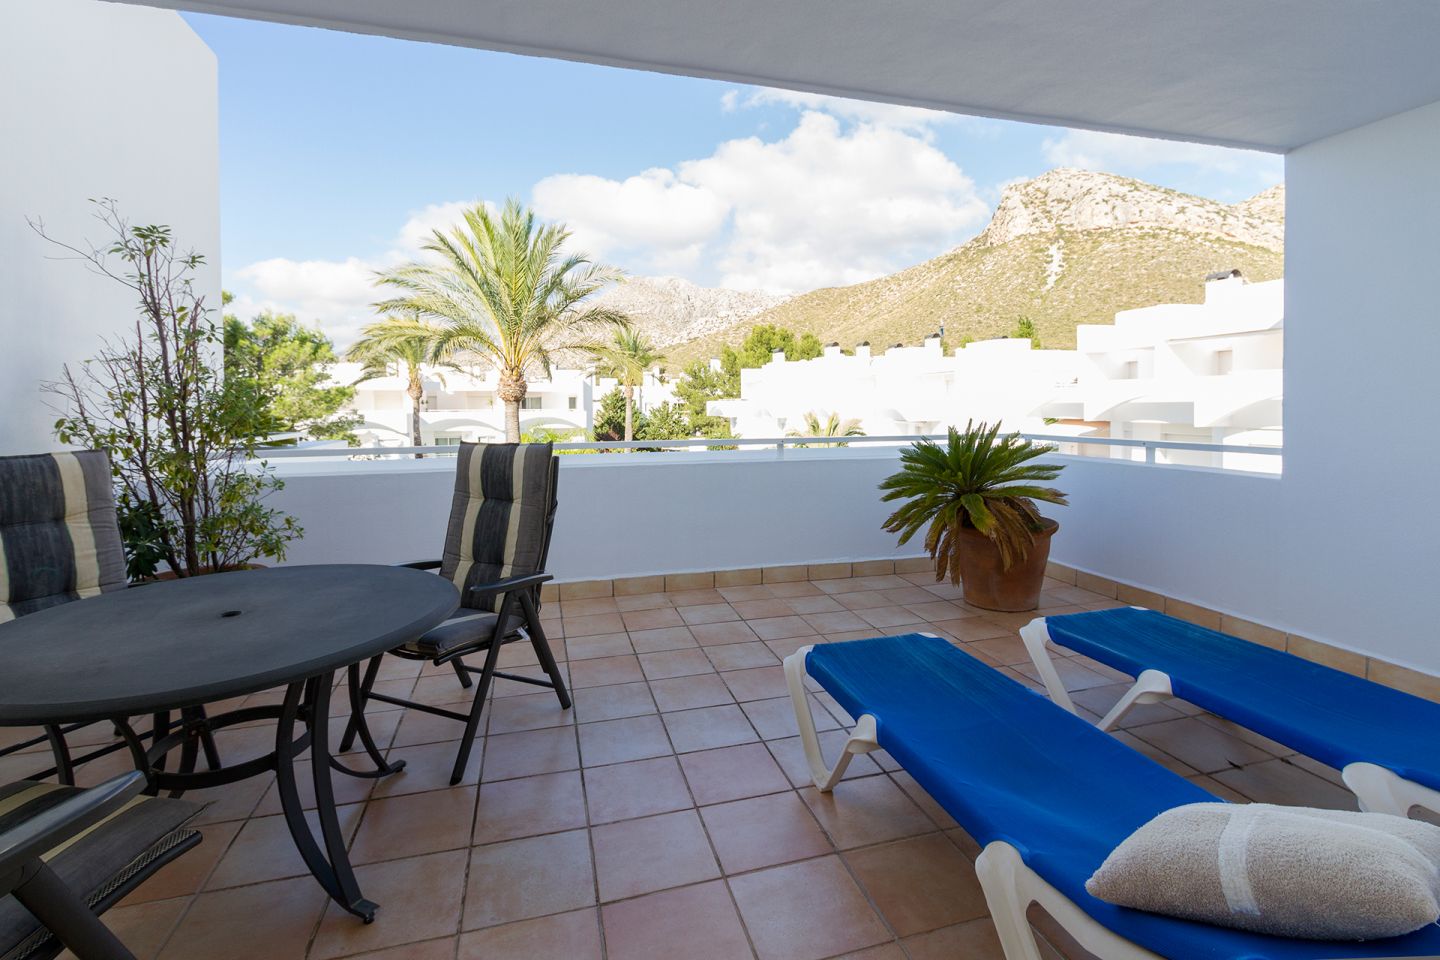 4 Bed Semidetached House for sale in PUERTO POLLENSA 3